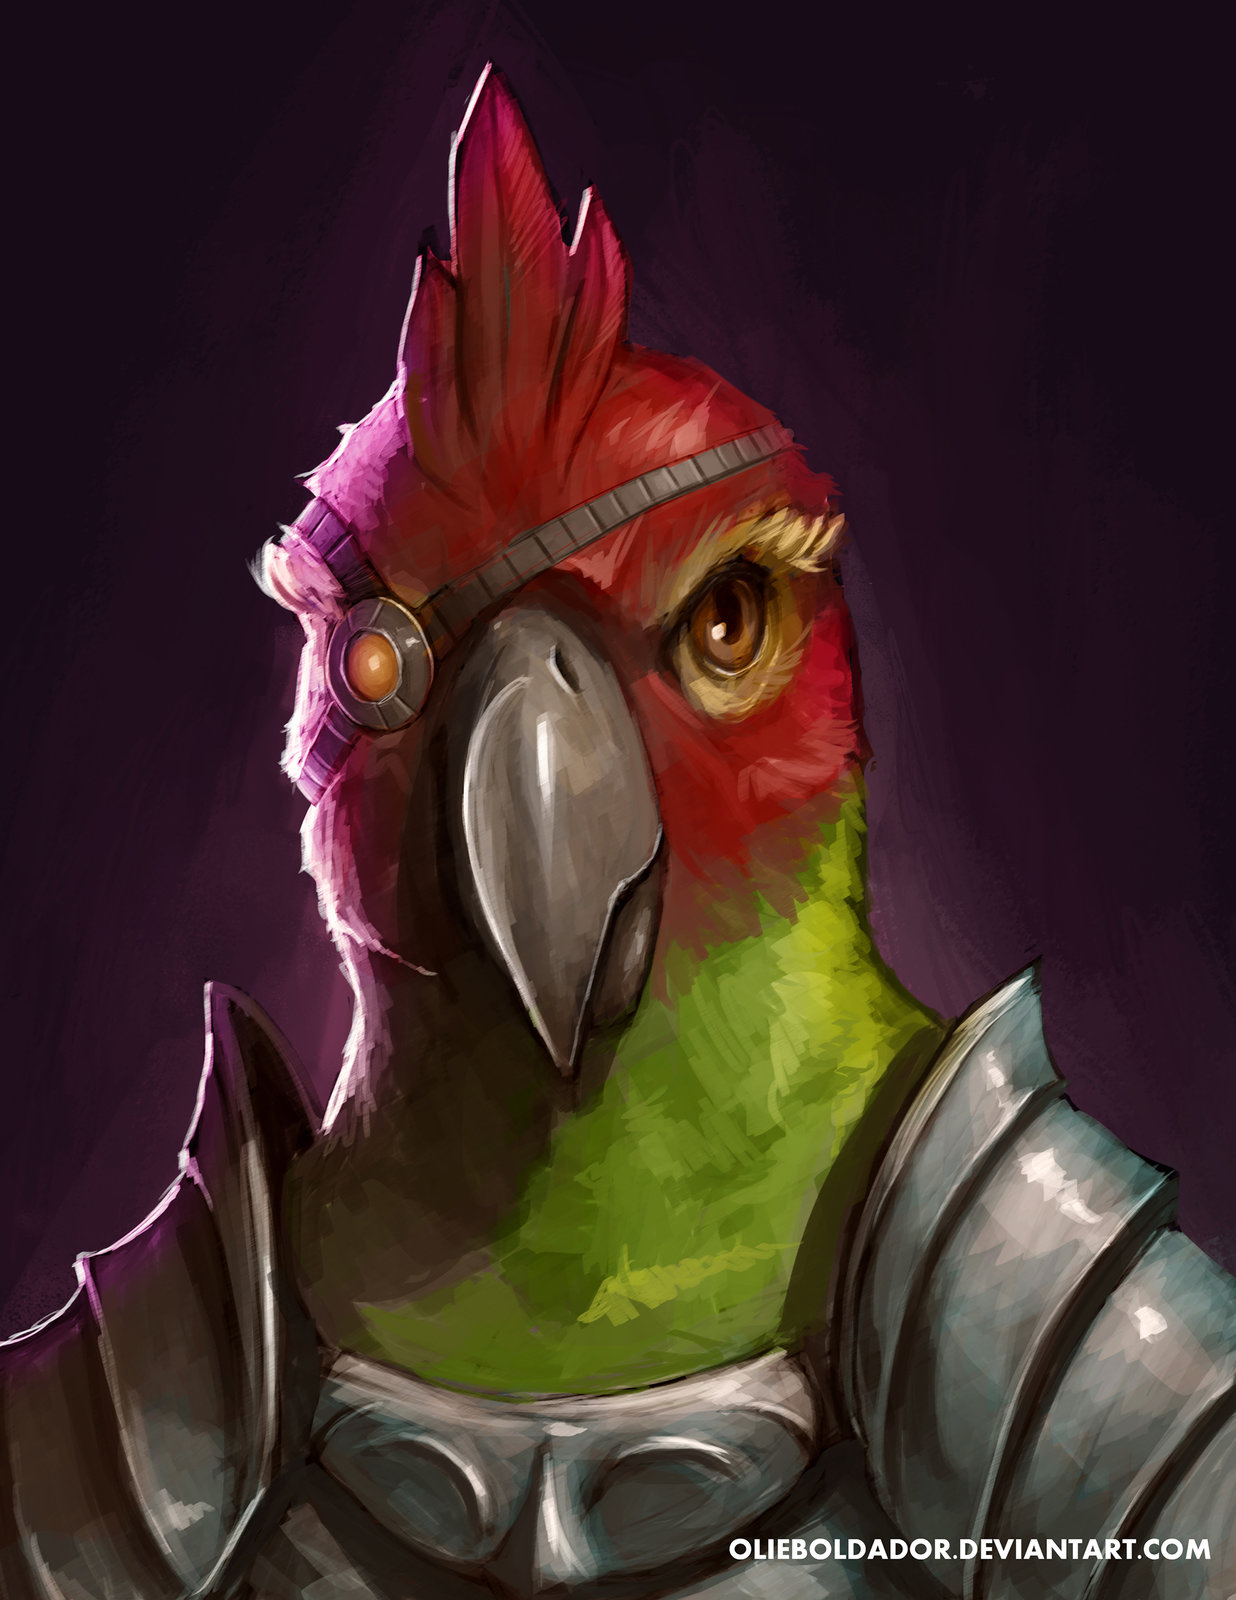 Parrot Pirate